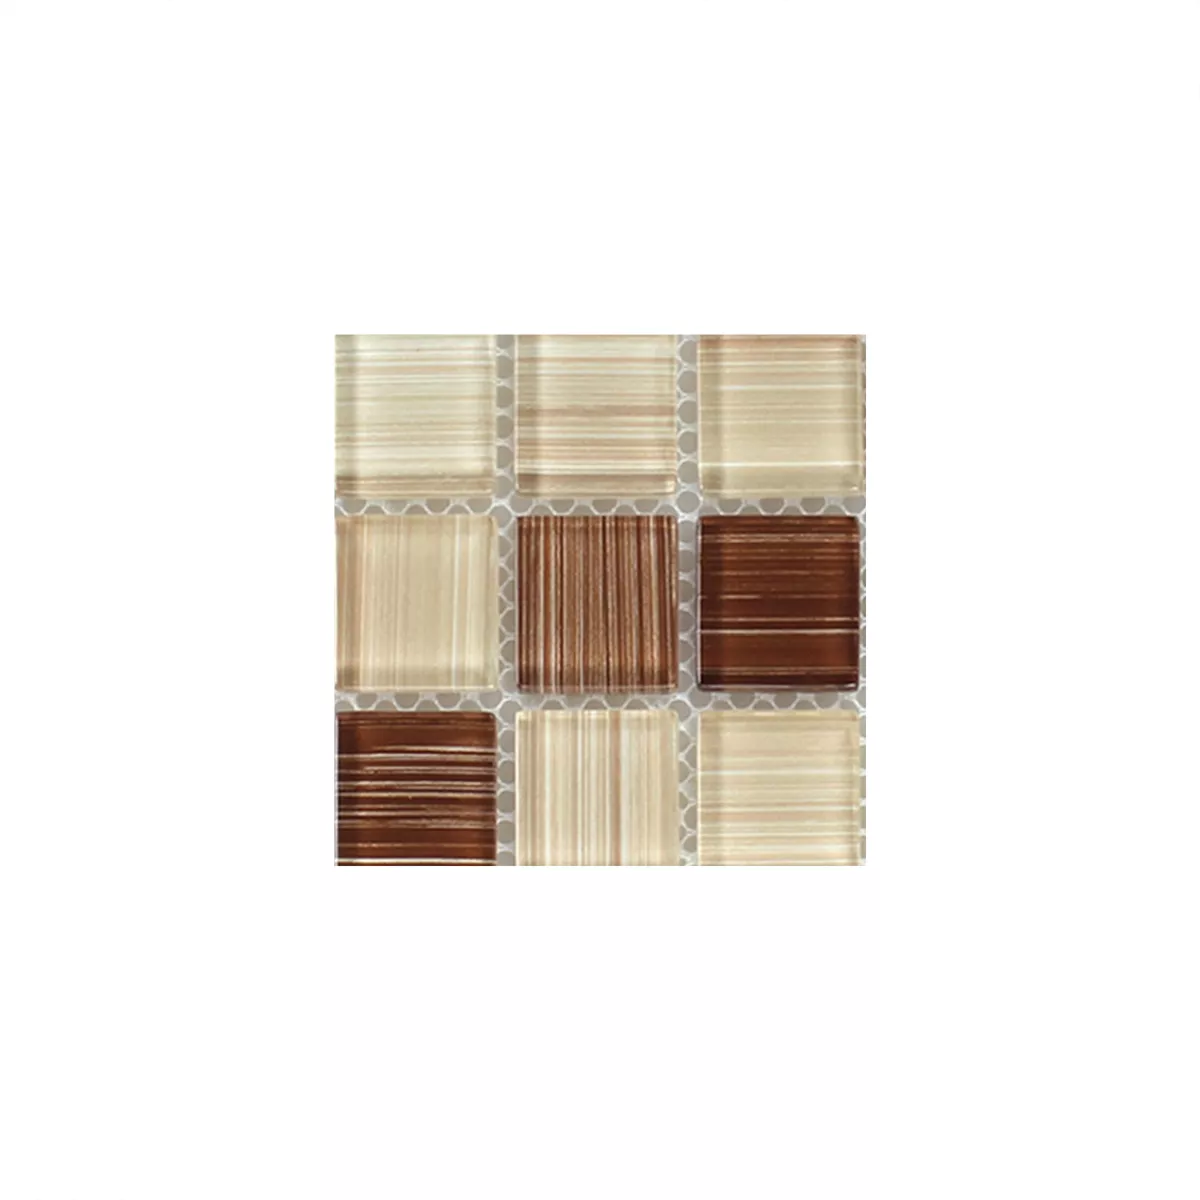 Sample Striped Crystal Mosaic Tiles Glass Brown Beige Mix